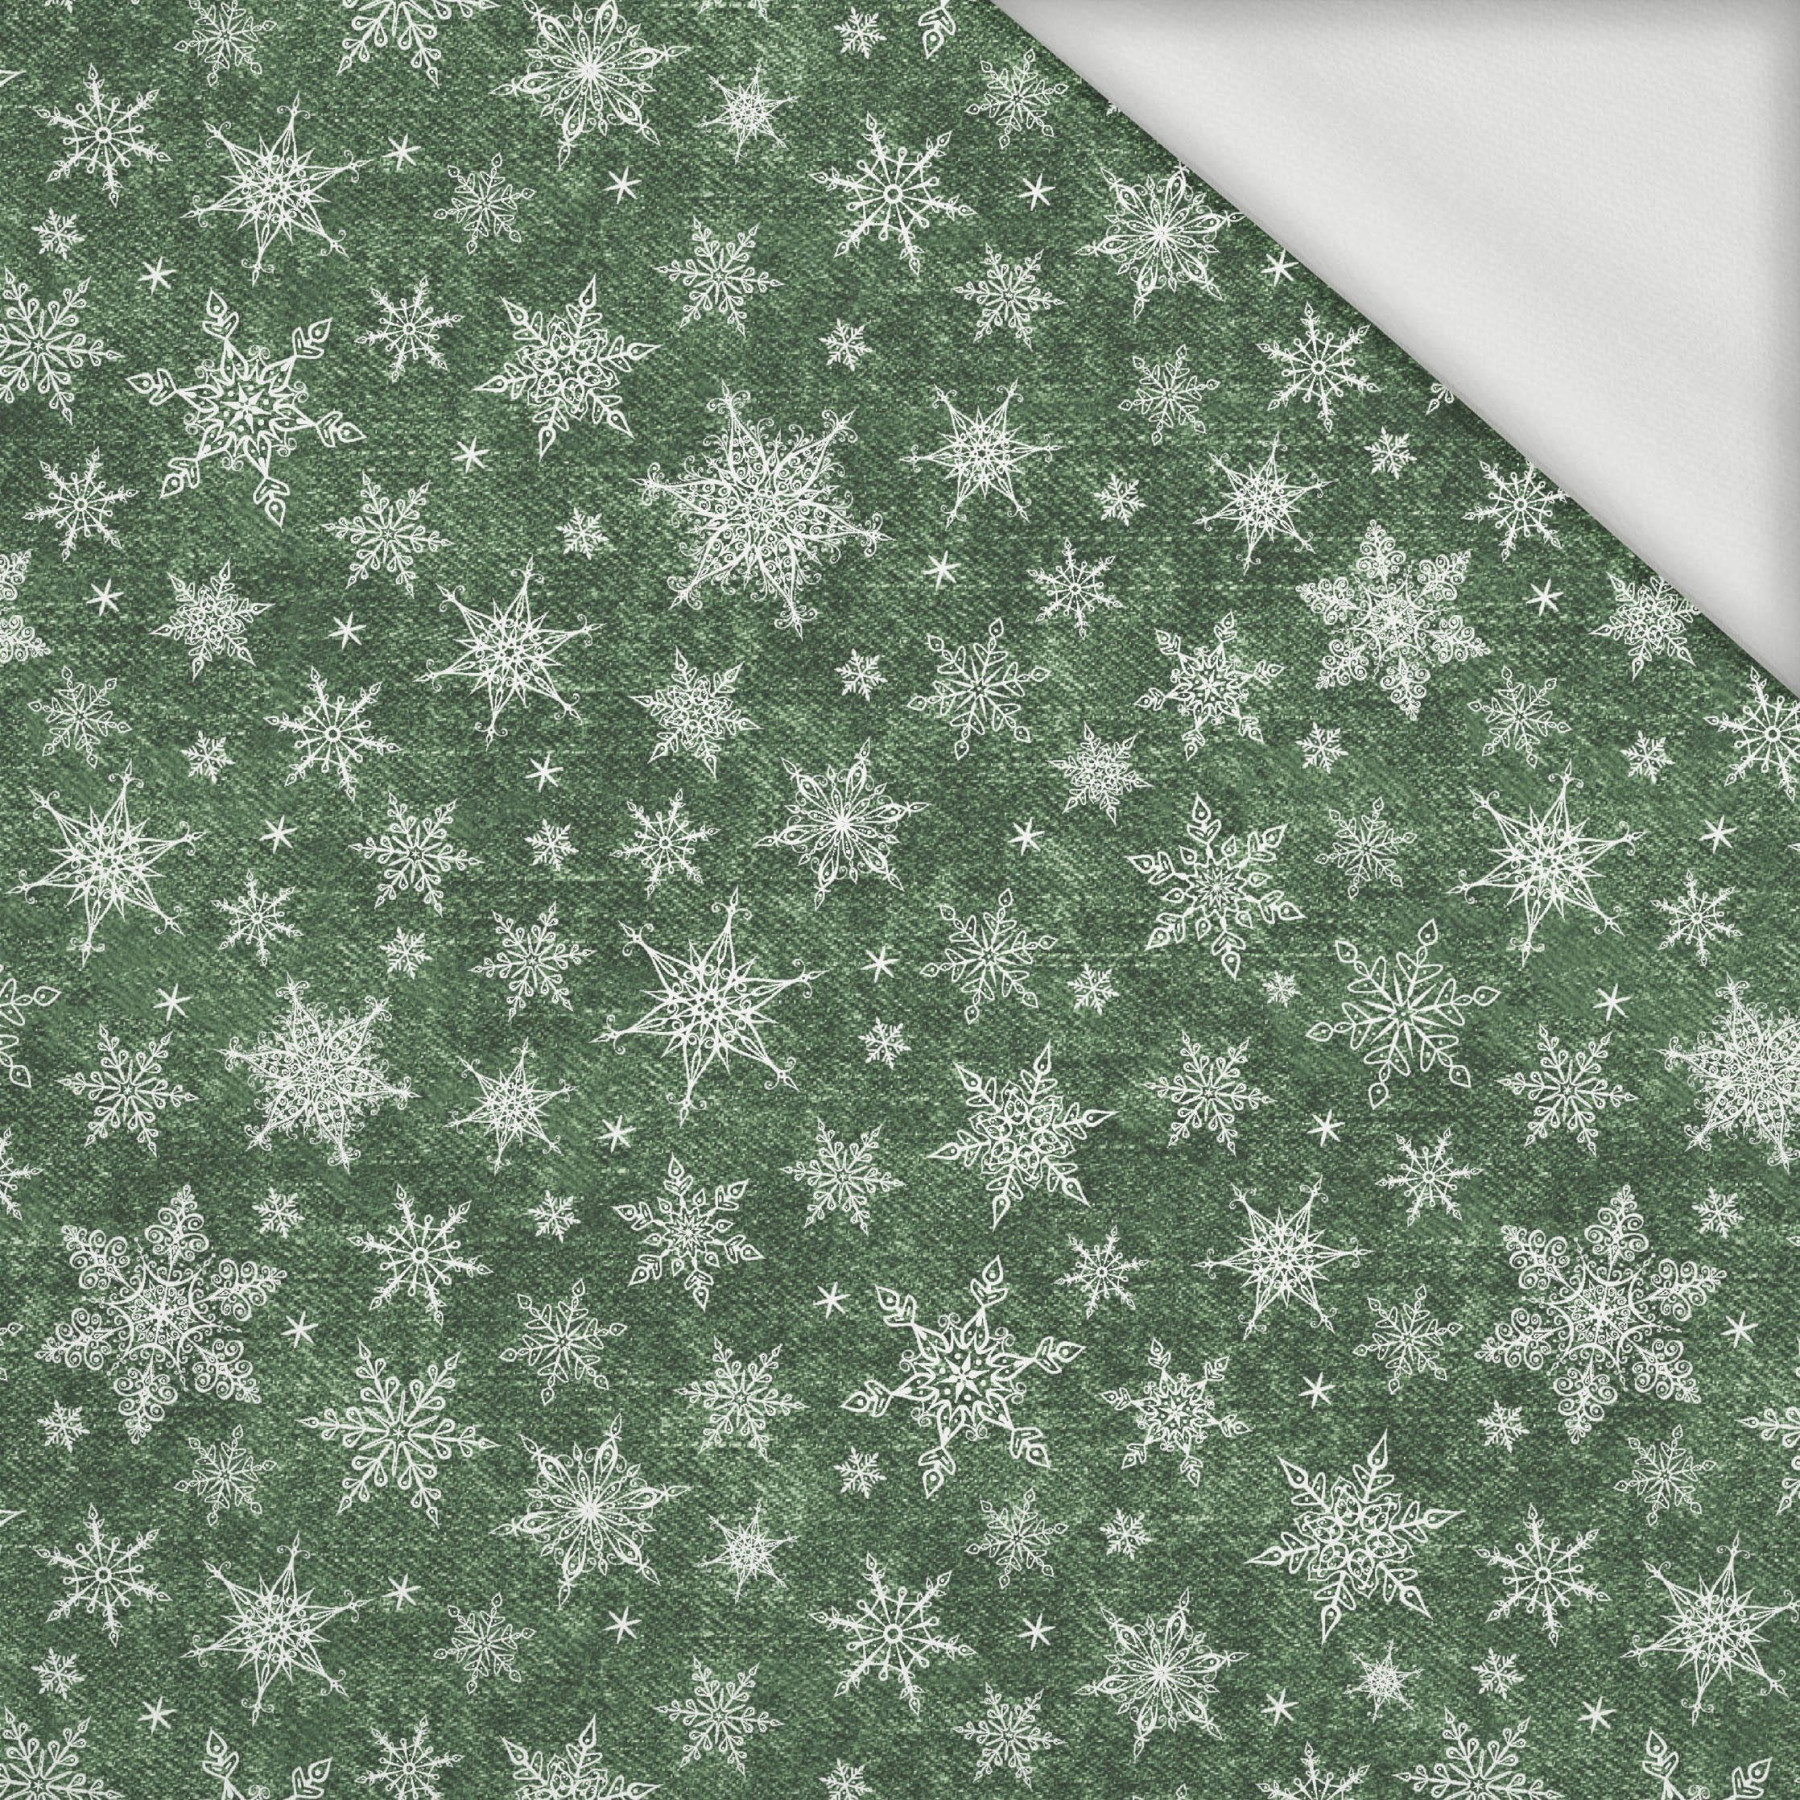 SNOWFLAKES PAT. 2 / ACID WASH BOTTLE GREEN - looped knit fabric